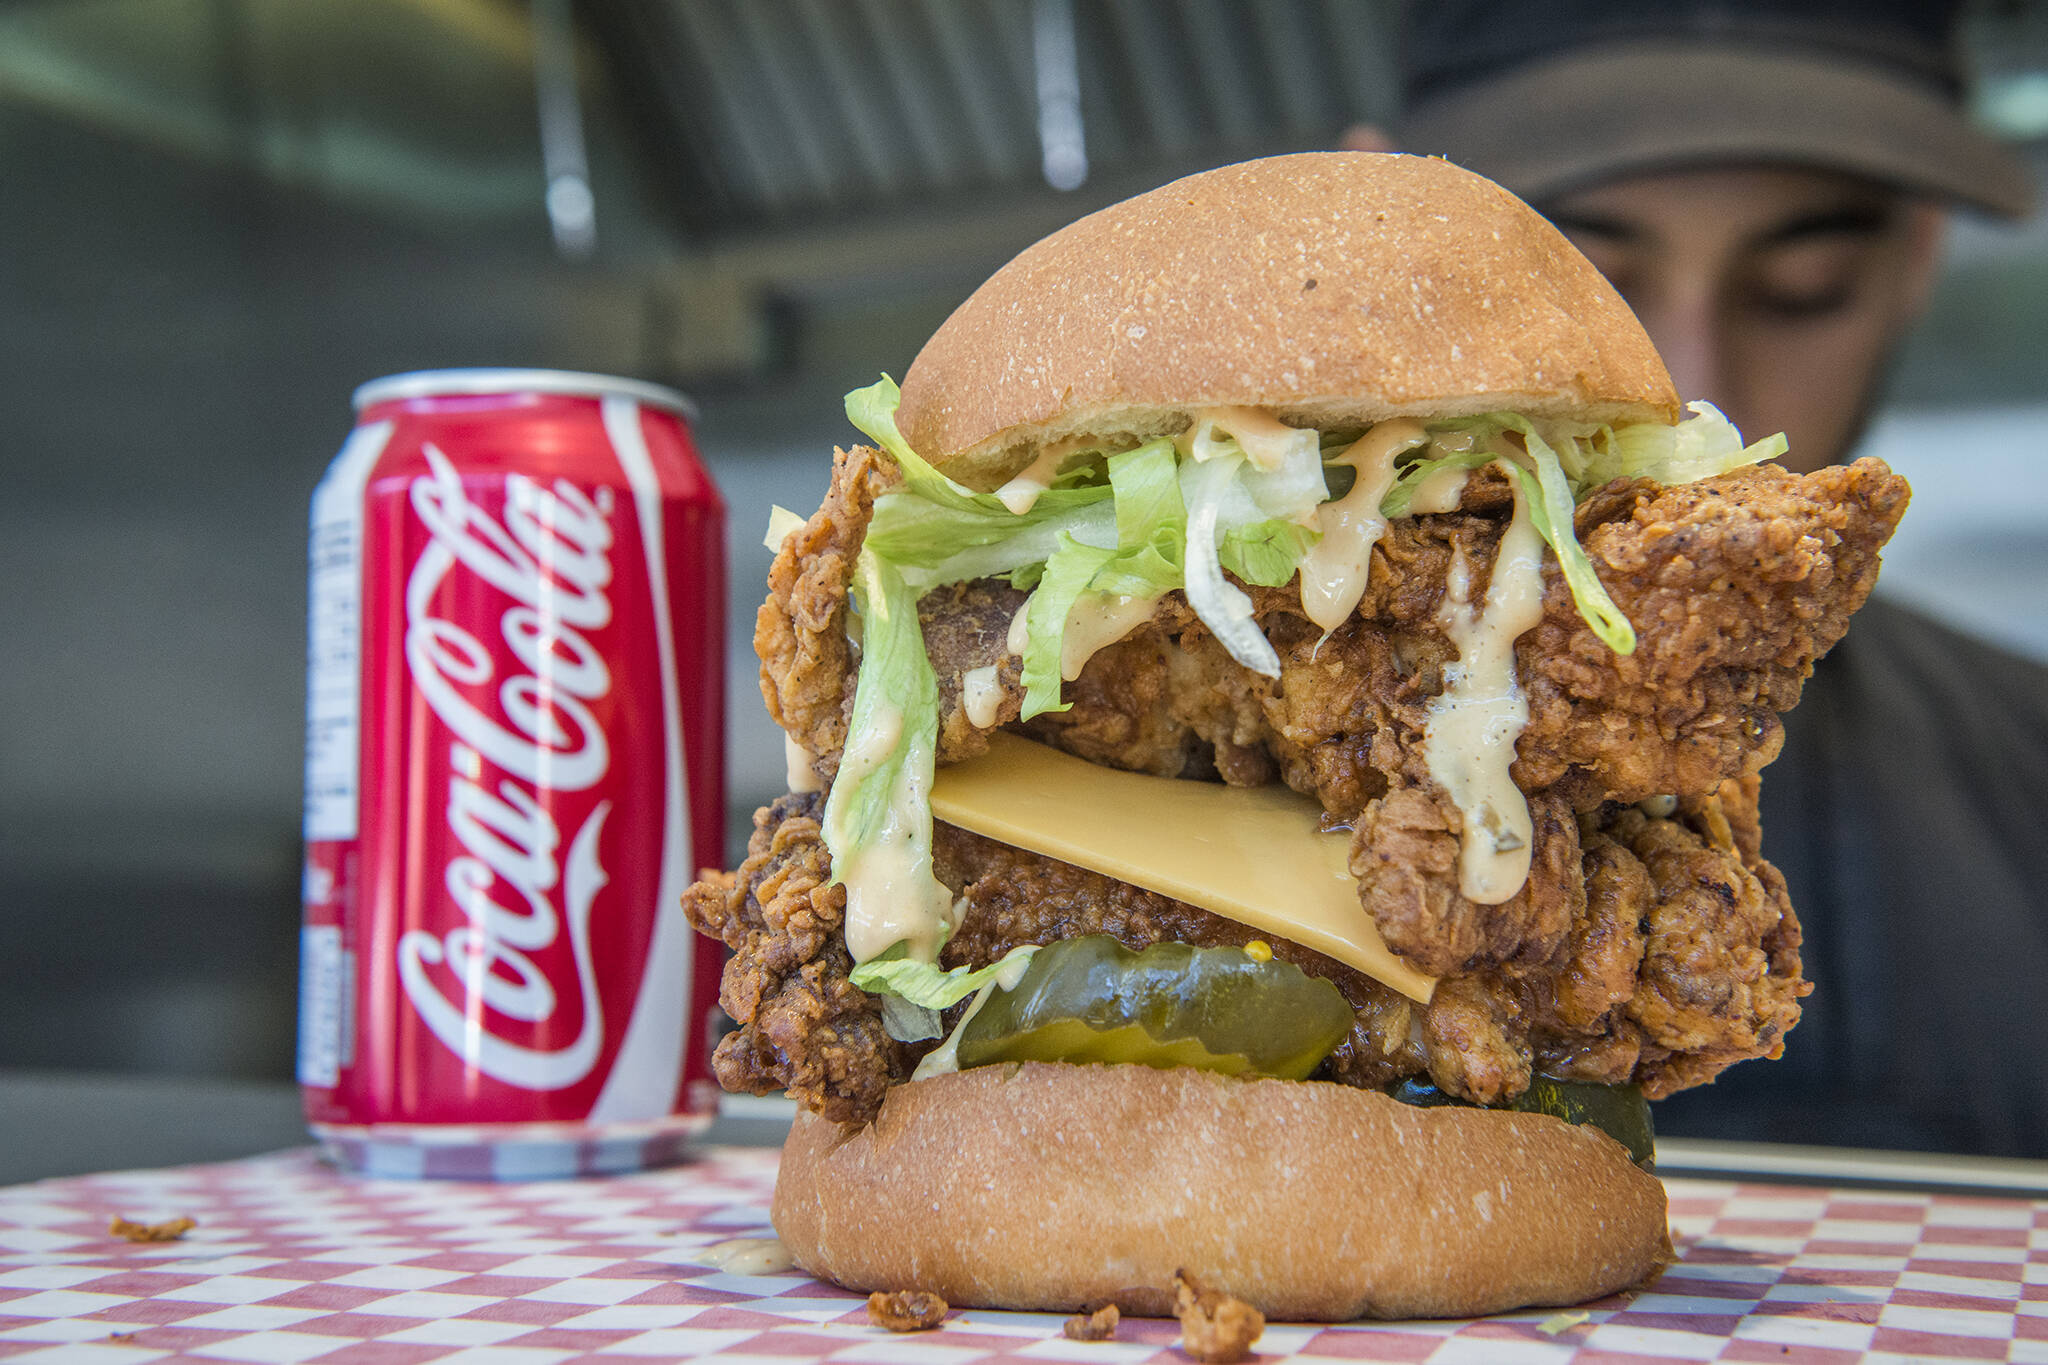 The Best New Cheap Eats in Toronto for 2016